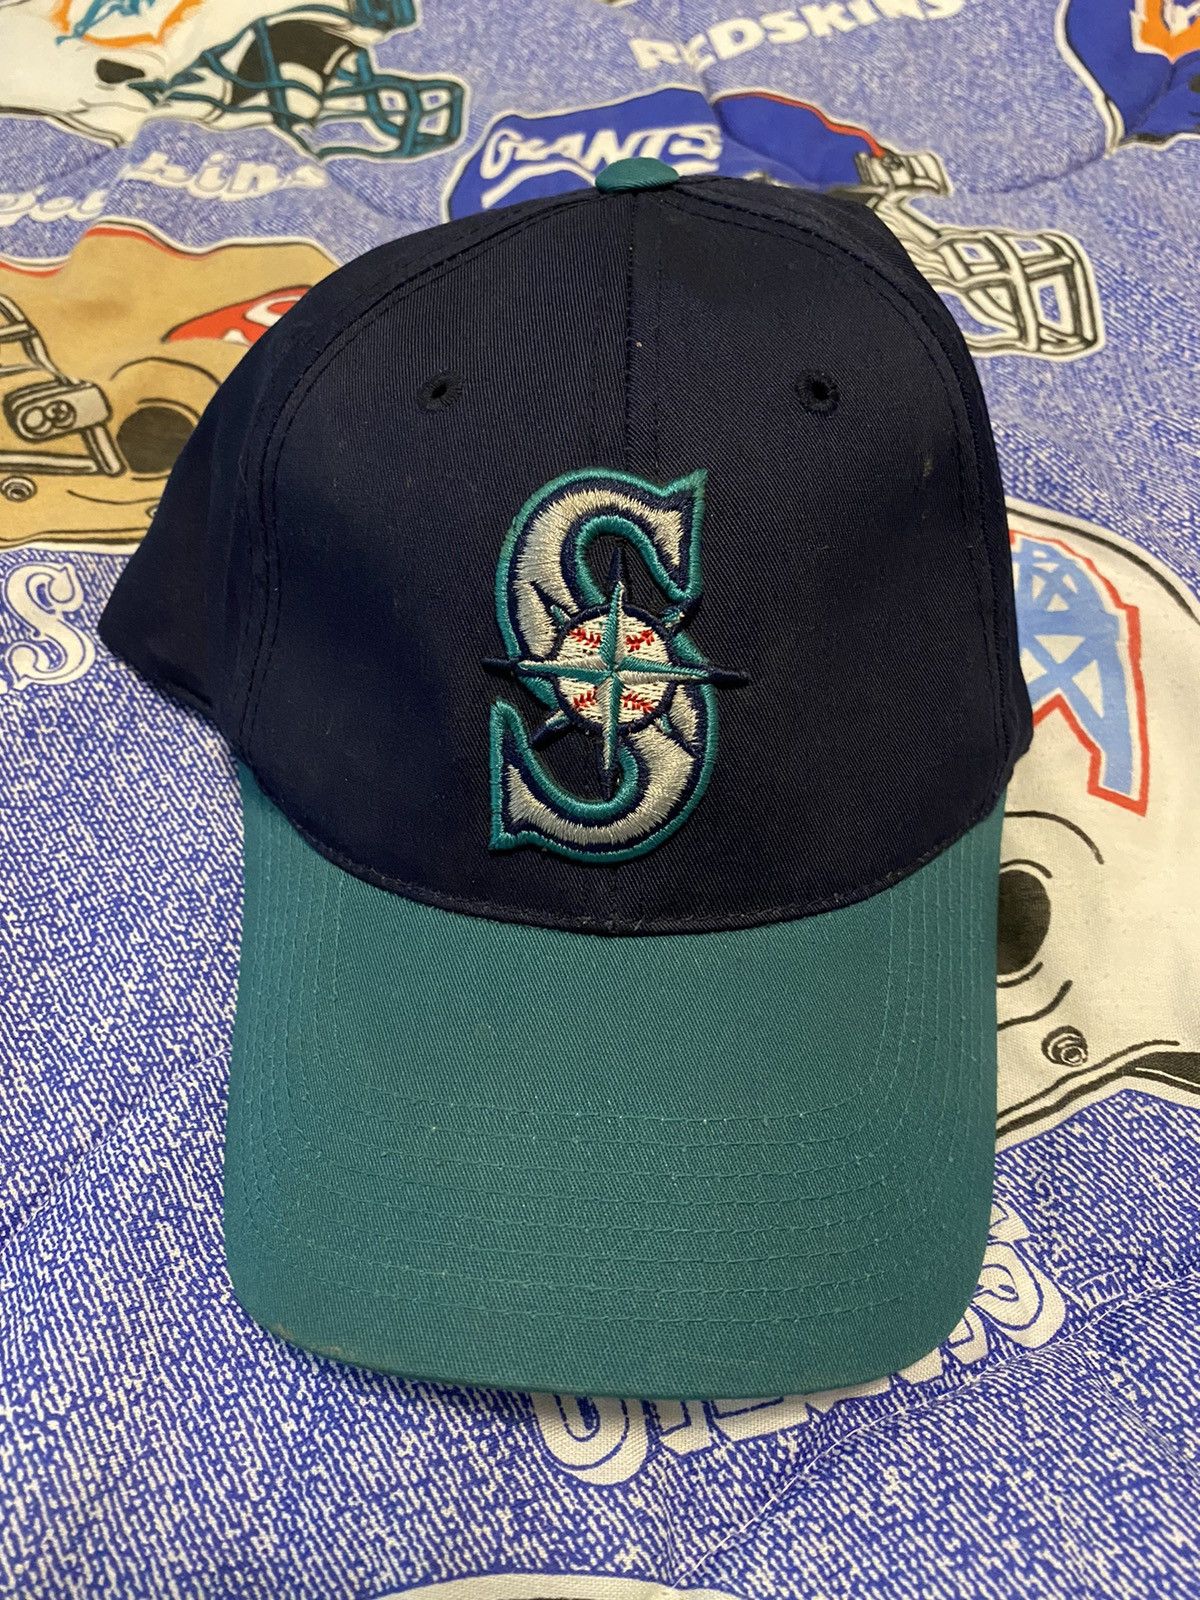 Vintage 80s 90s Seattle Mariners Fitted Cap Size 6 5/8 MLB Baseball Hat